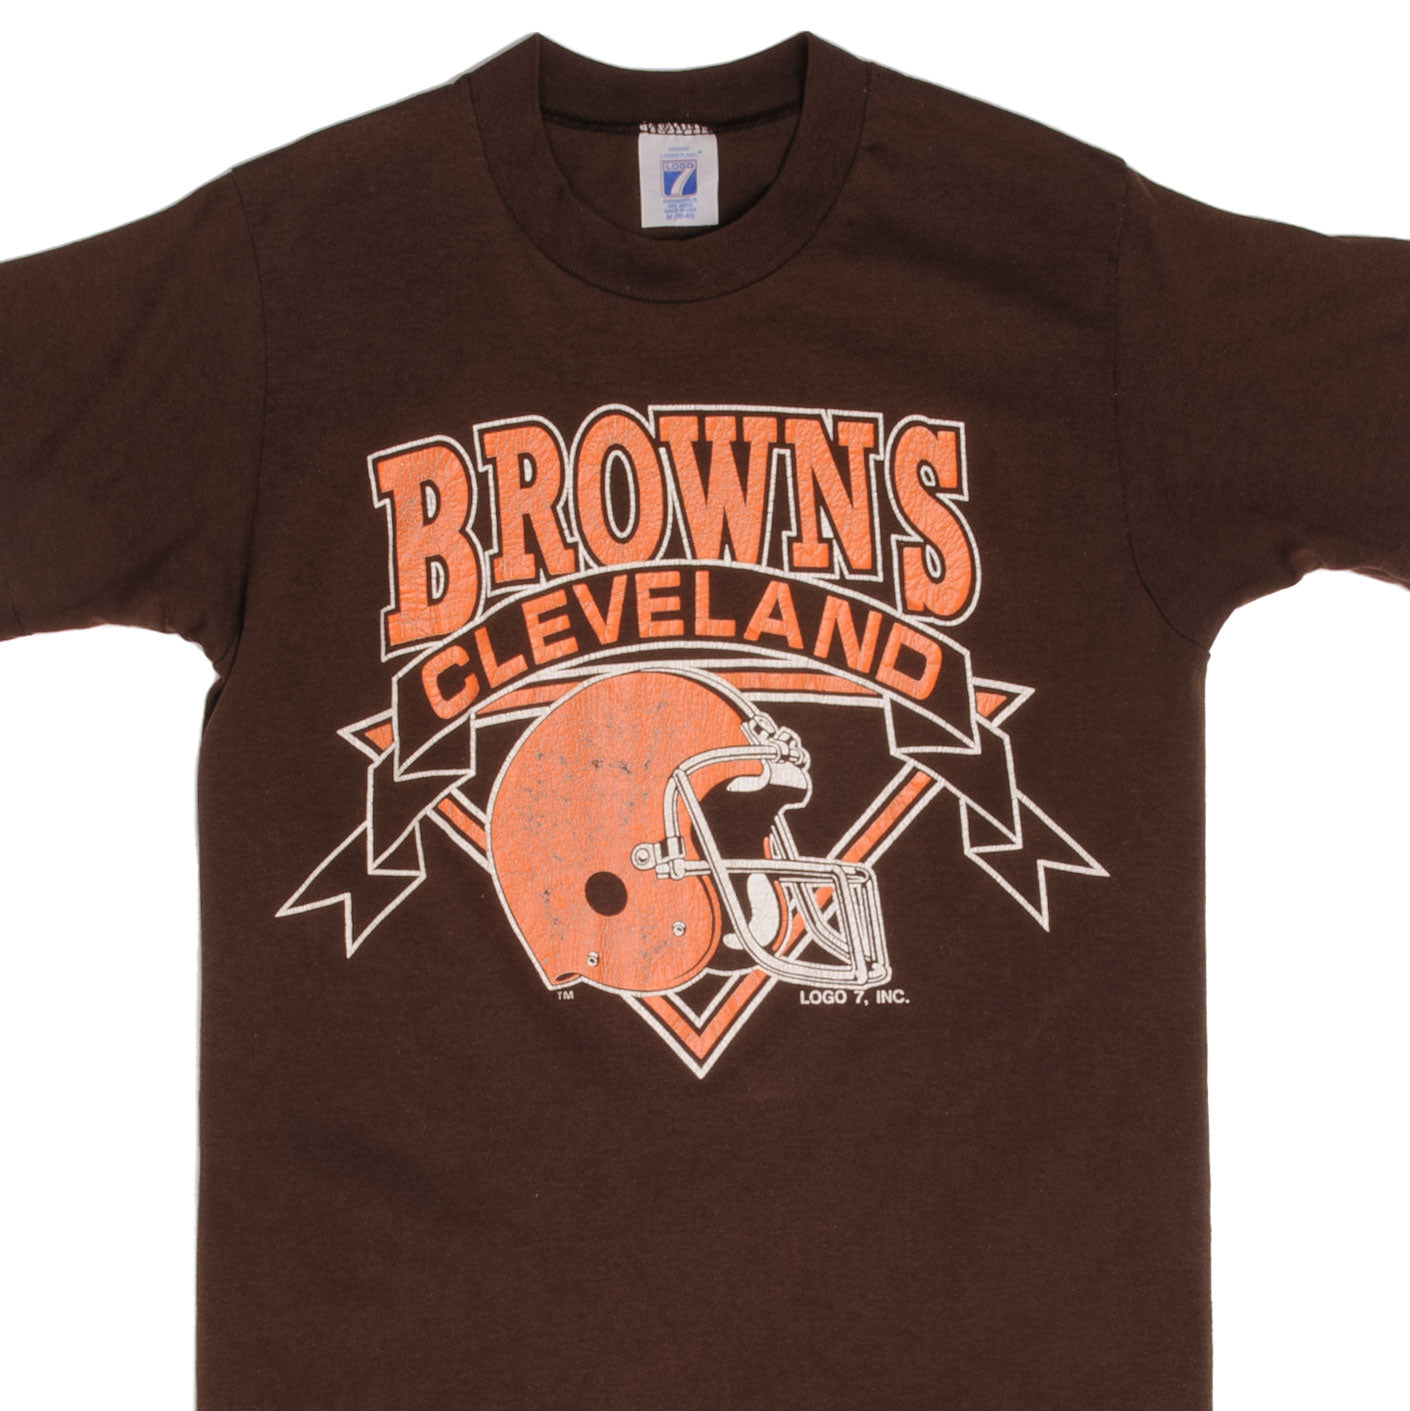 Vintage NFL Browns Tee Shirt 1980s Size Small Made in USA